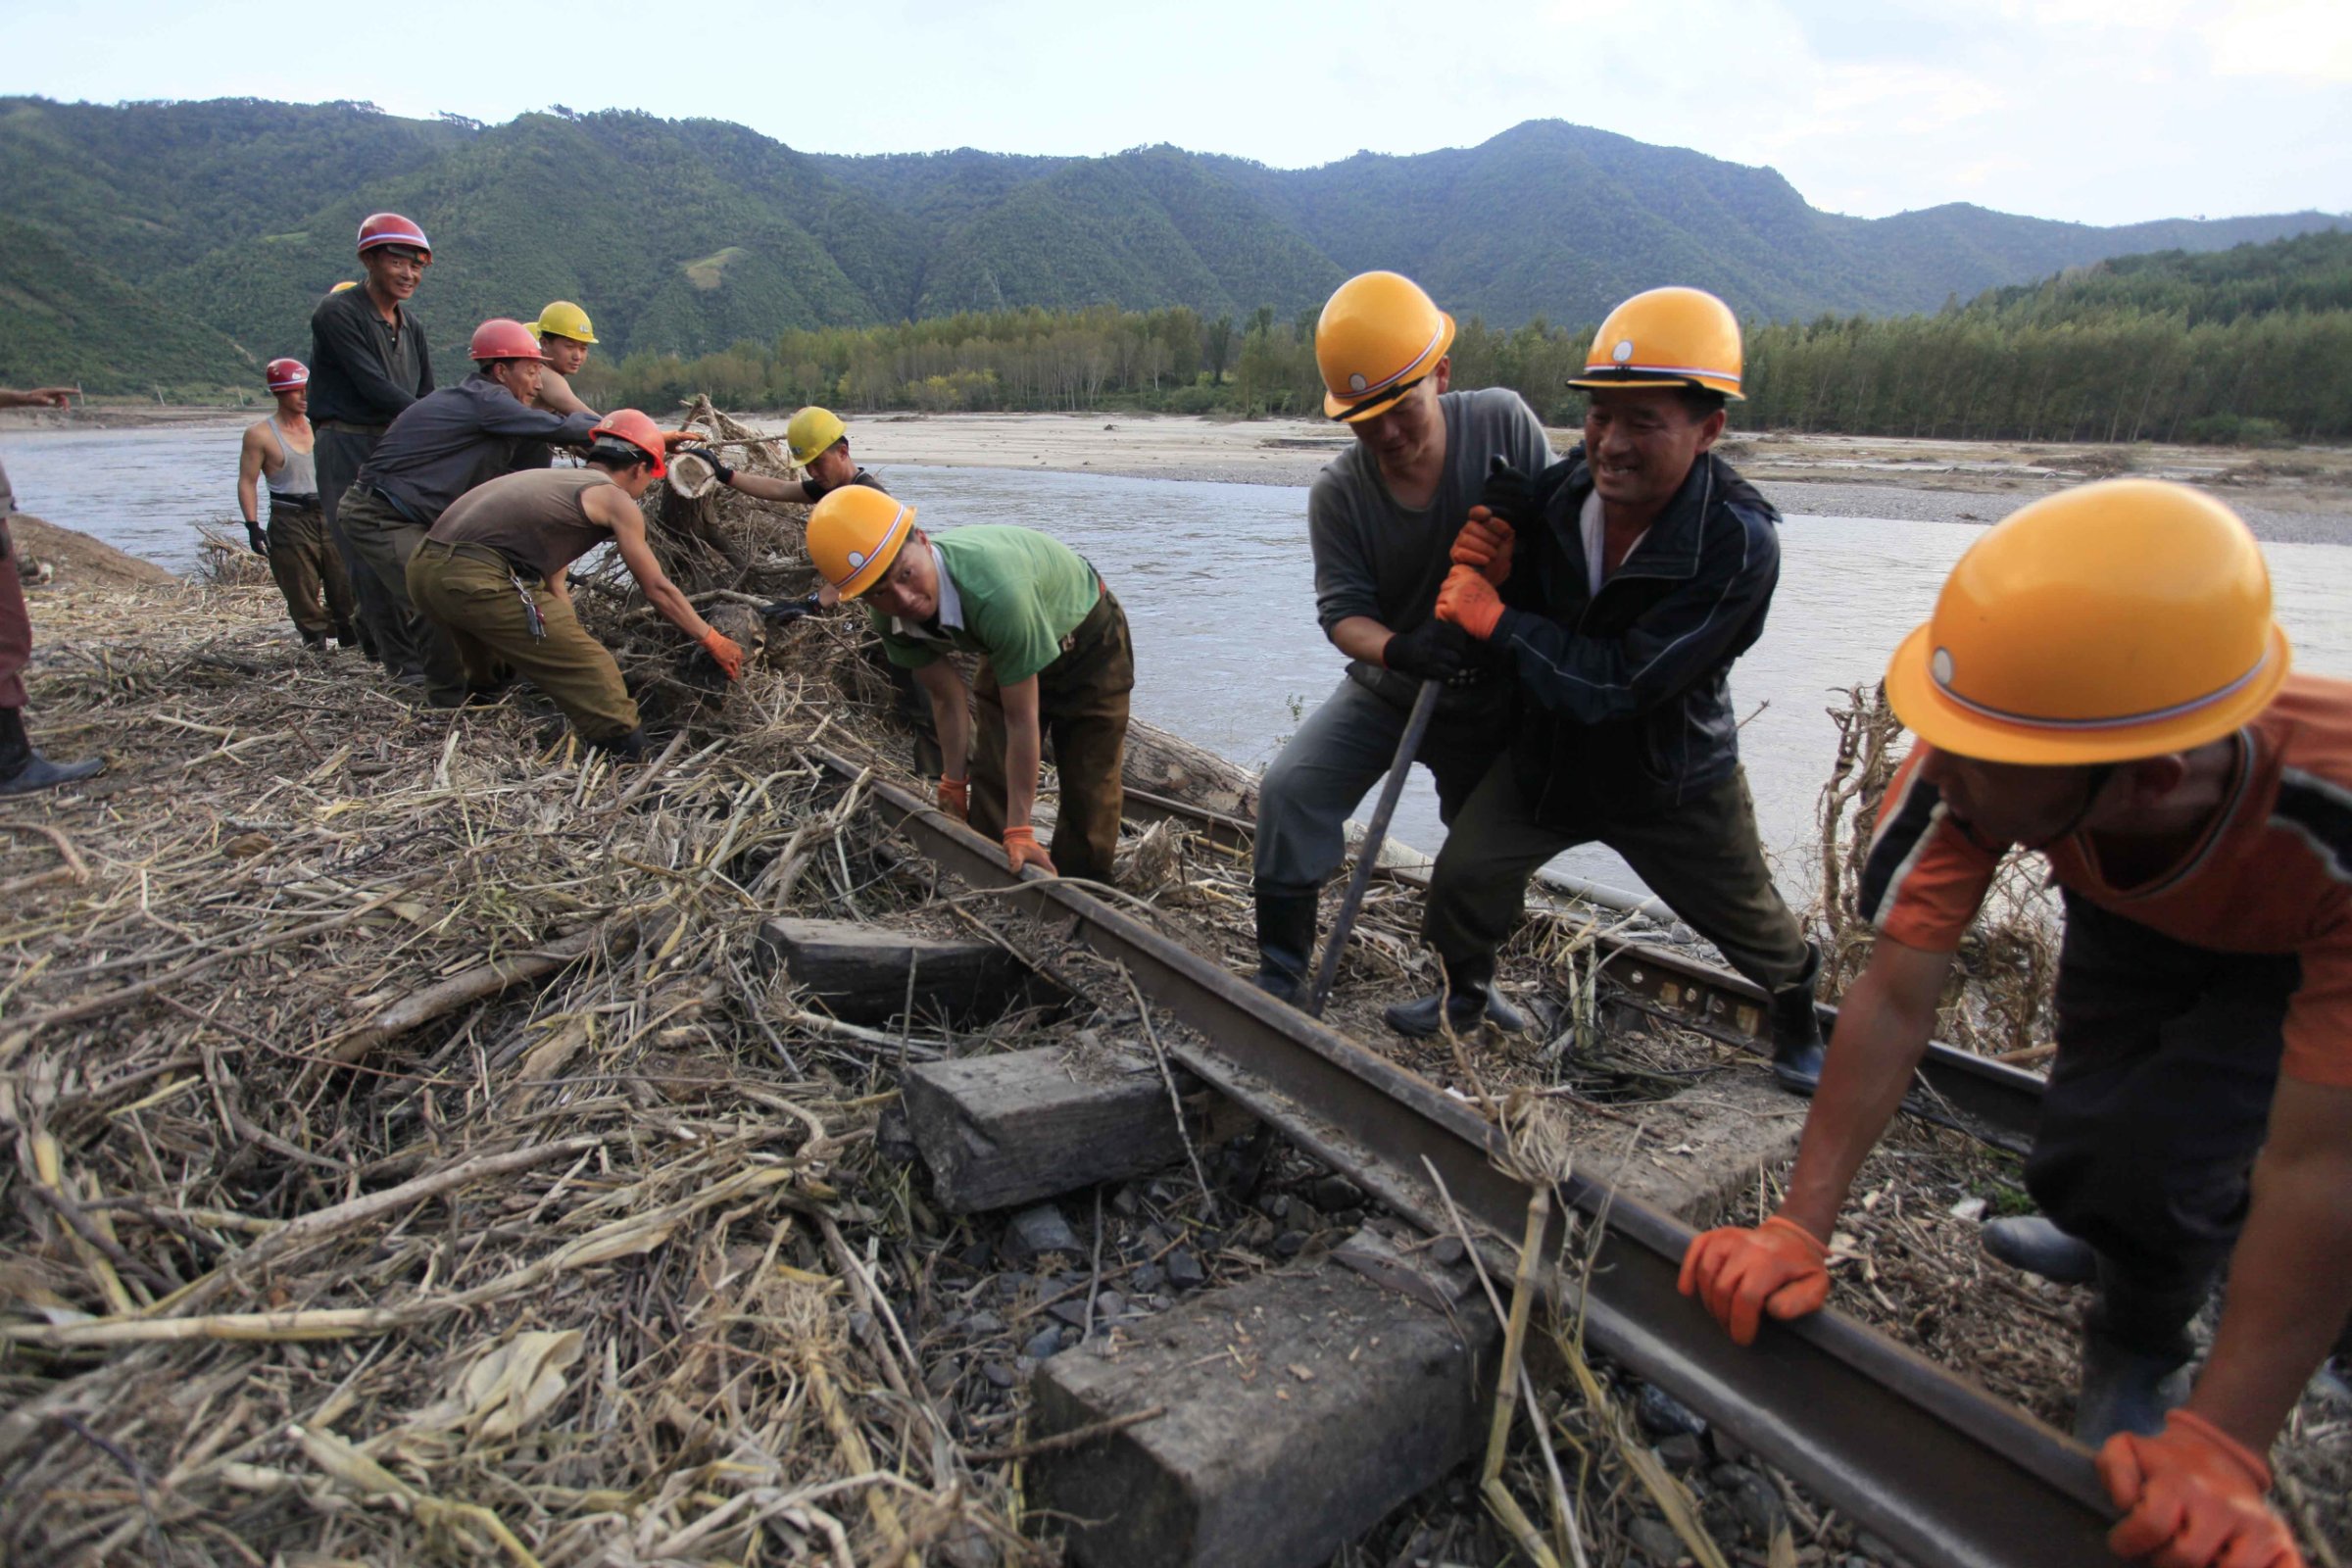 Workers repair the flood-damaged train track between Sinjon and Kanphyong train stations in North Hamgyong Province, North Korea, Friday, Sept. 16, 2016. North Korean soldiers and relief teams rushed to clear roads and railway tracks, build shelters and provide food and sanitation Friday to tens of thousands of residents in a remote part of the country near the Chinese border that was devastated by heavy downpours and flash-floods when a typhoon pounded their villages last week. (AP Photo/Kim Kwang Hyon)